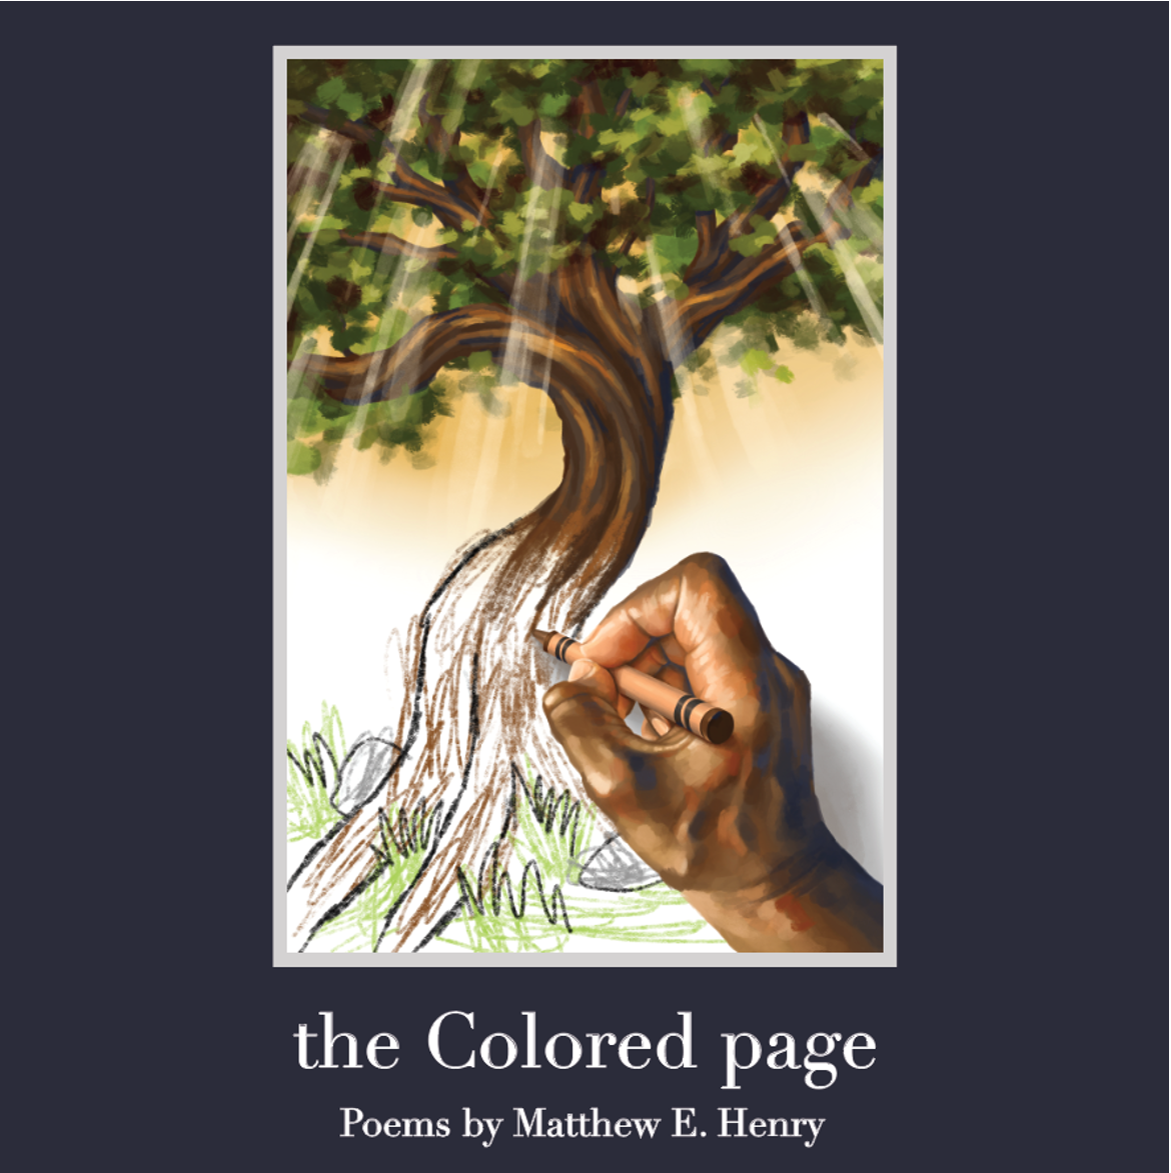 the Colored page